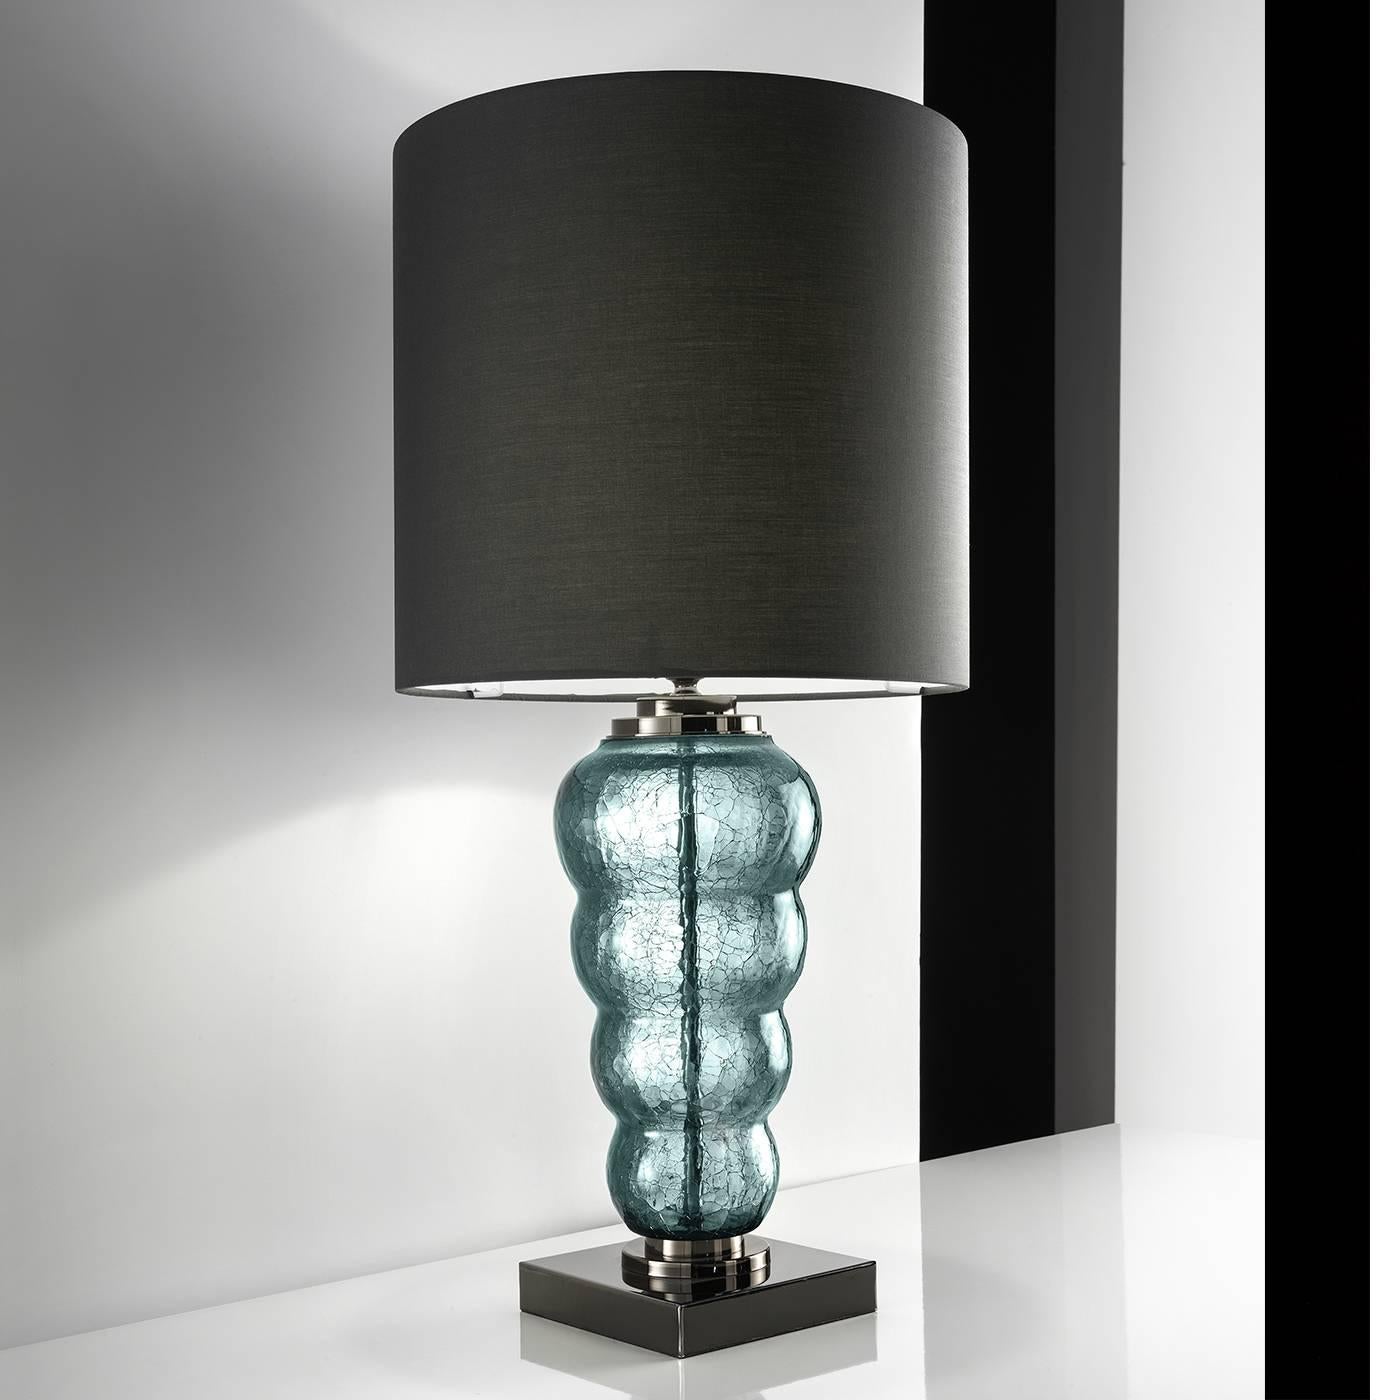 Stacked, handblown glass globes create the alluring aesthetic of this elegant table lamp. The square metal base with black finish supports the sinuous body of the mouth-blown viridian Murano glass with a crackle finish, framed at both ends with a